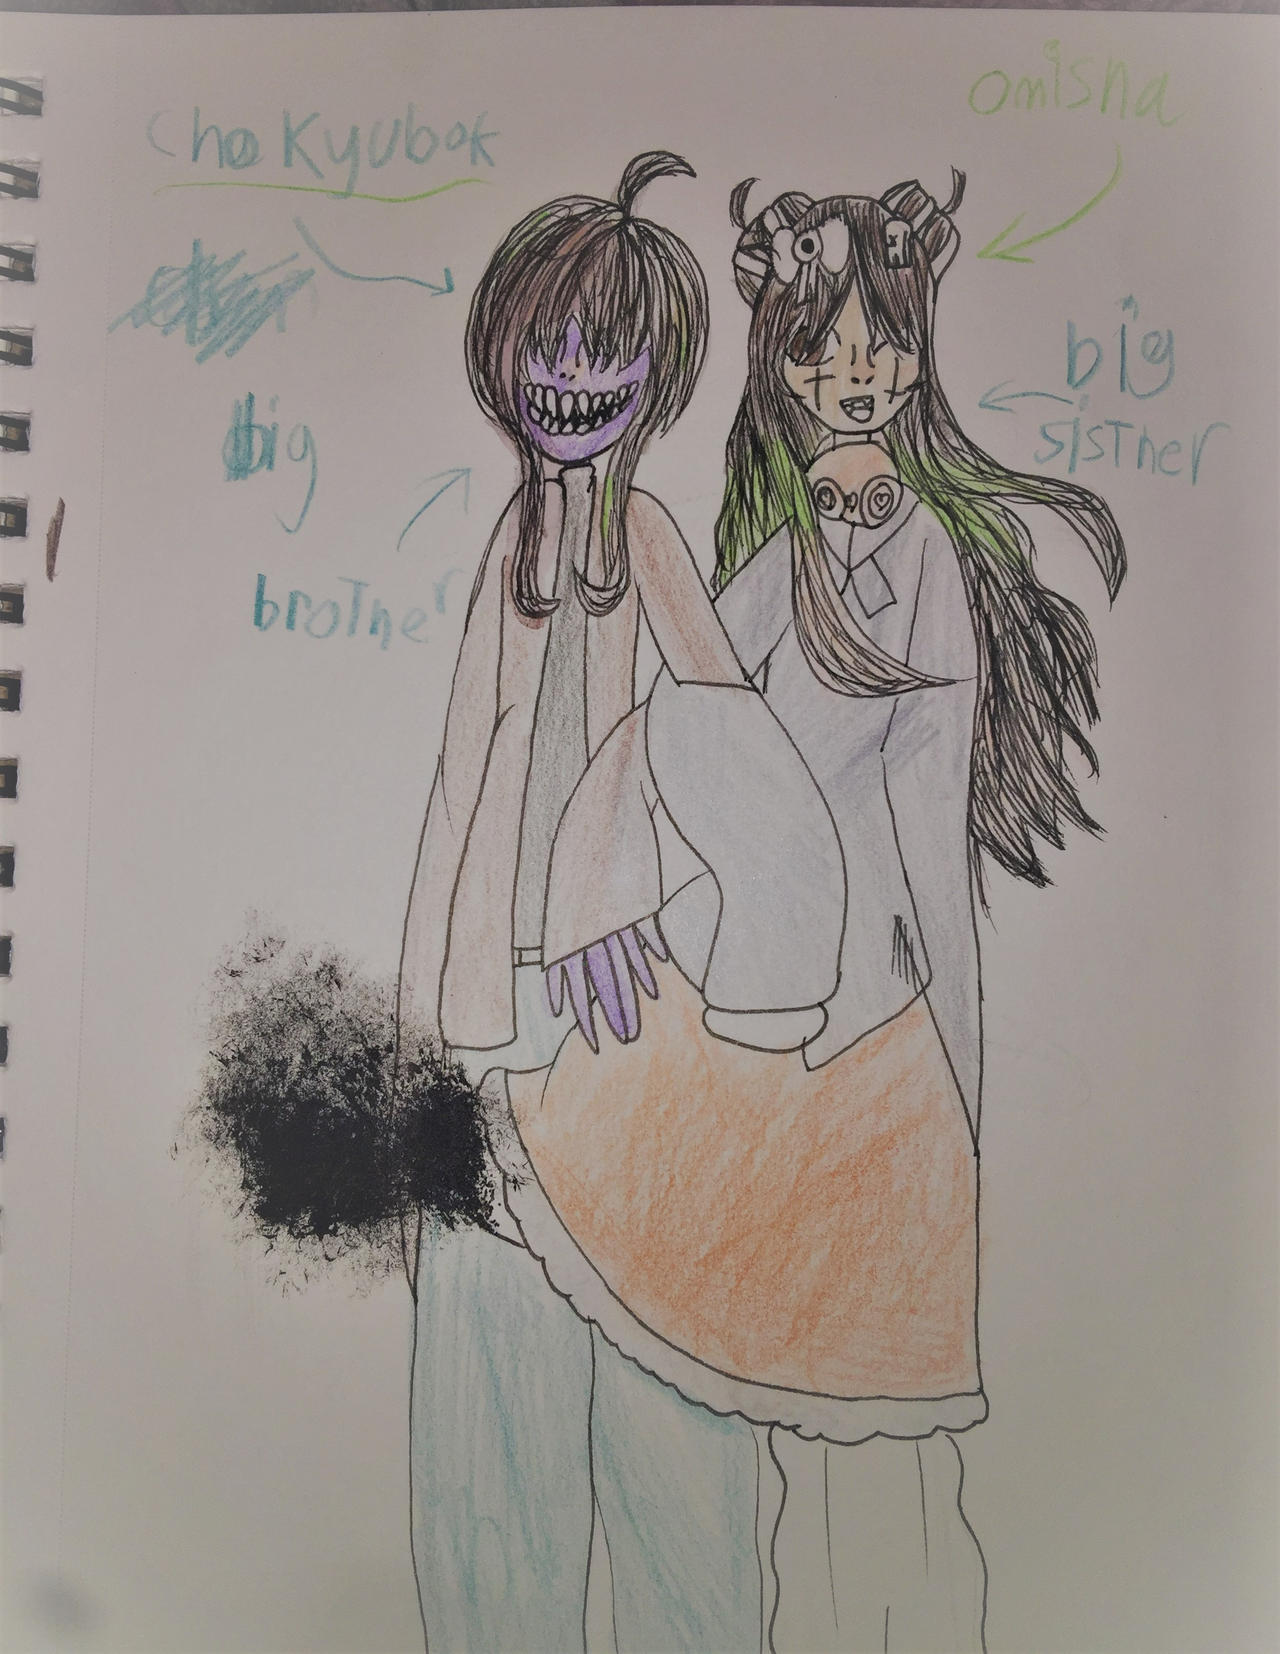 big brother and big sister by Bloodmoonsoul667 on DeviantArt